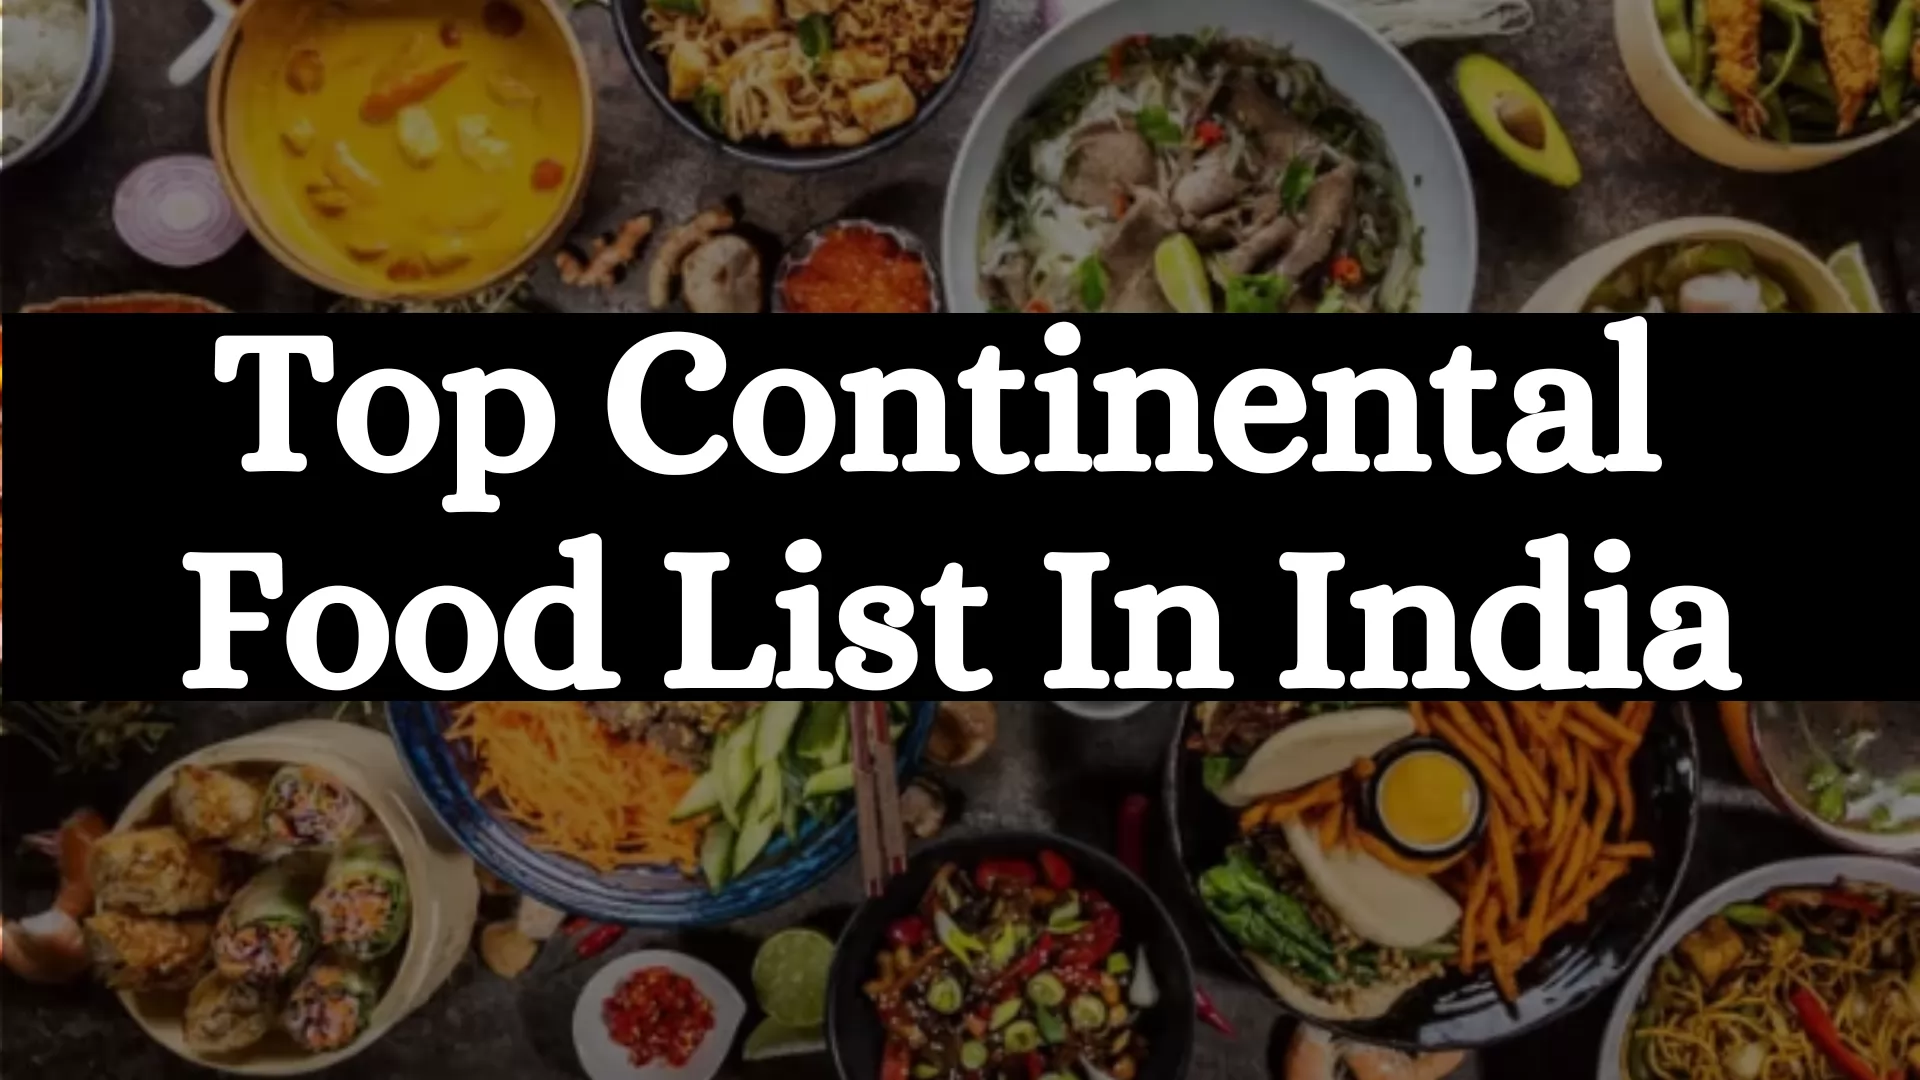 Top Continental Food List In India